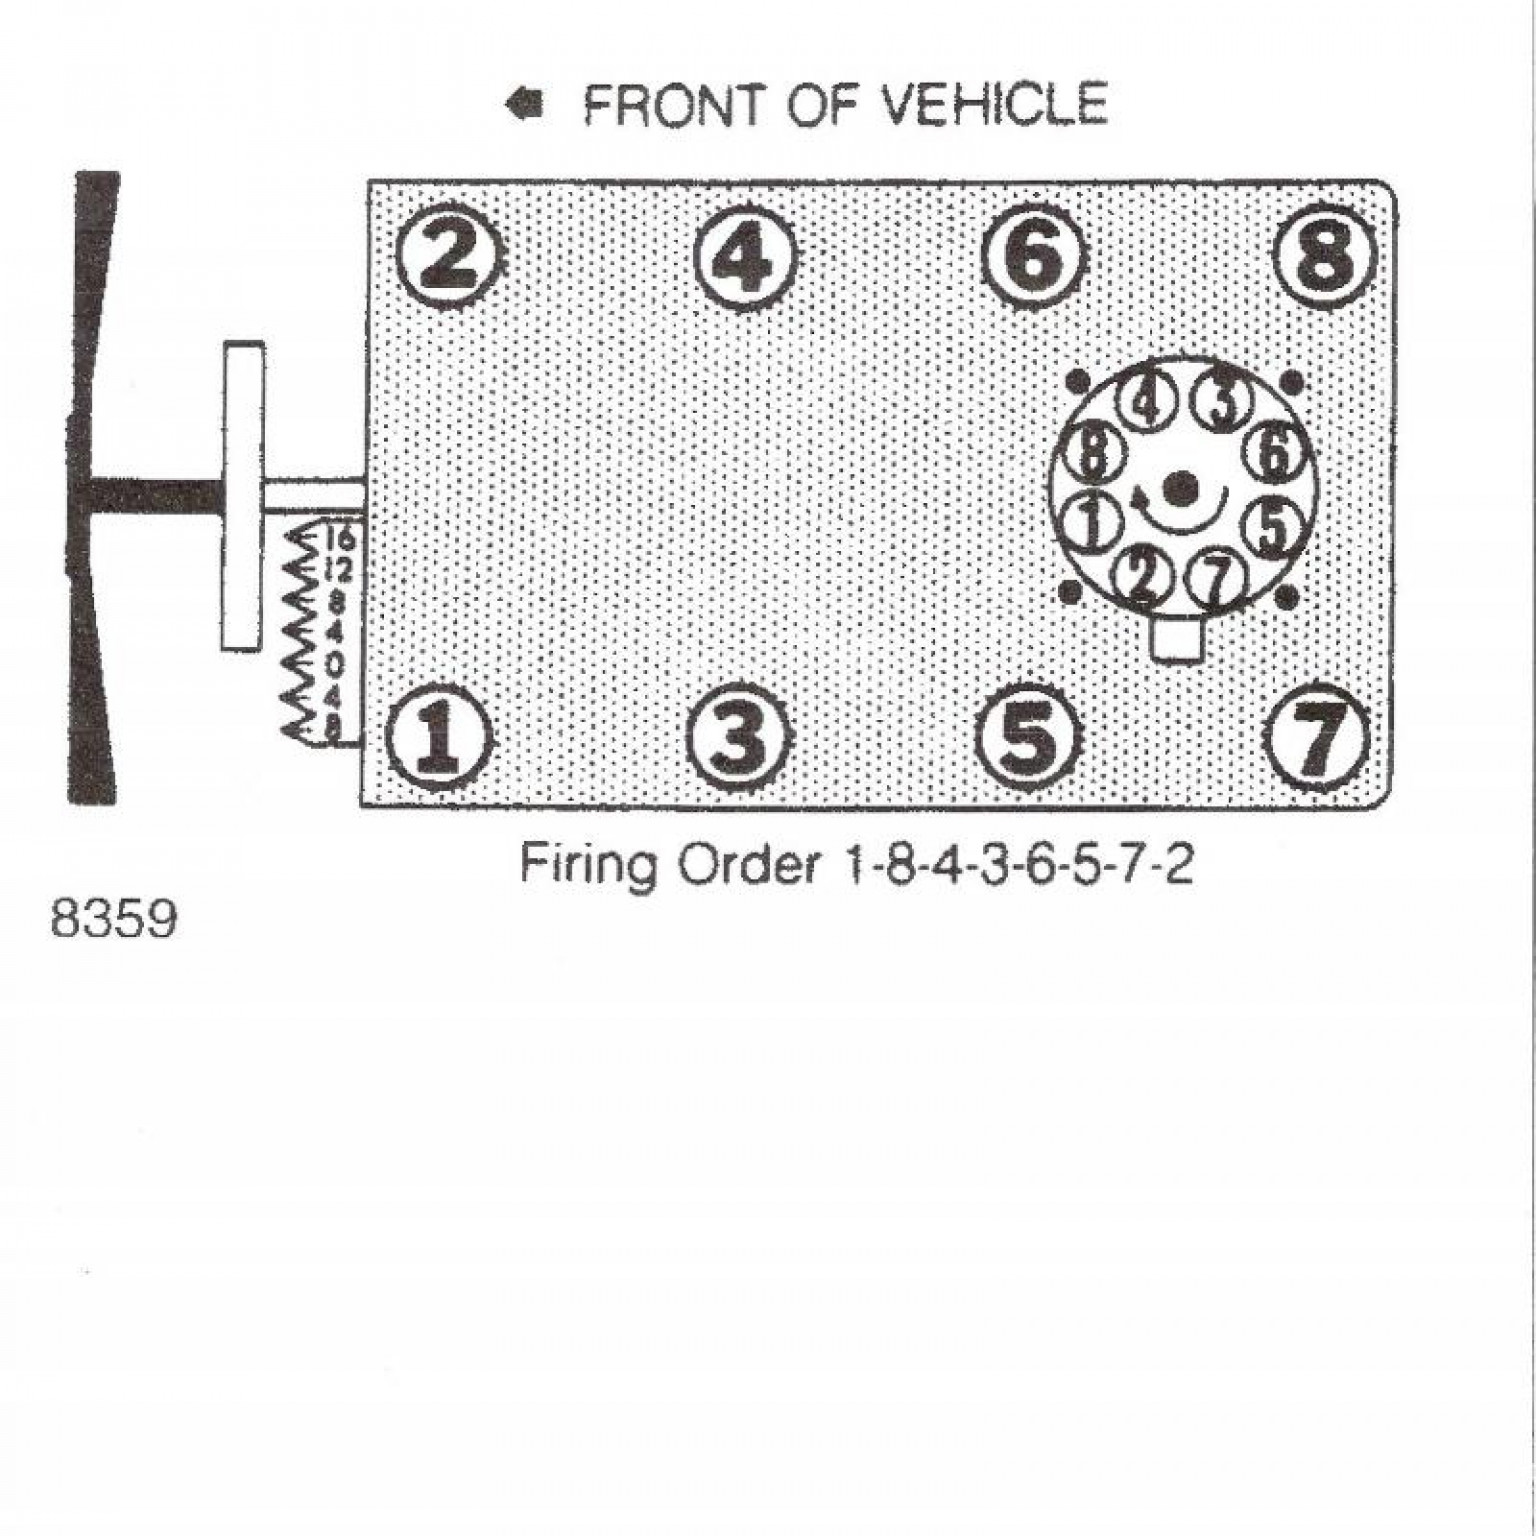 2003 Ford Mustang V6 Firing Order Wiring And Printable